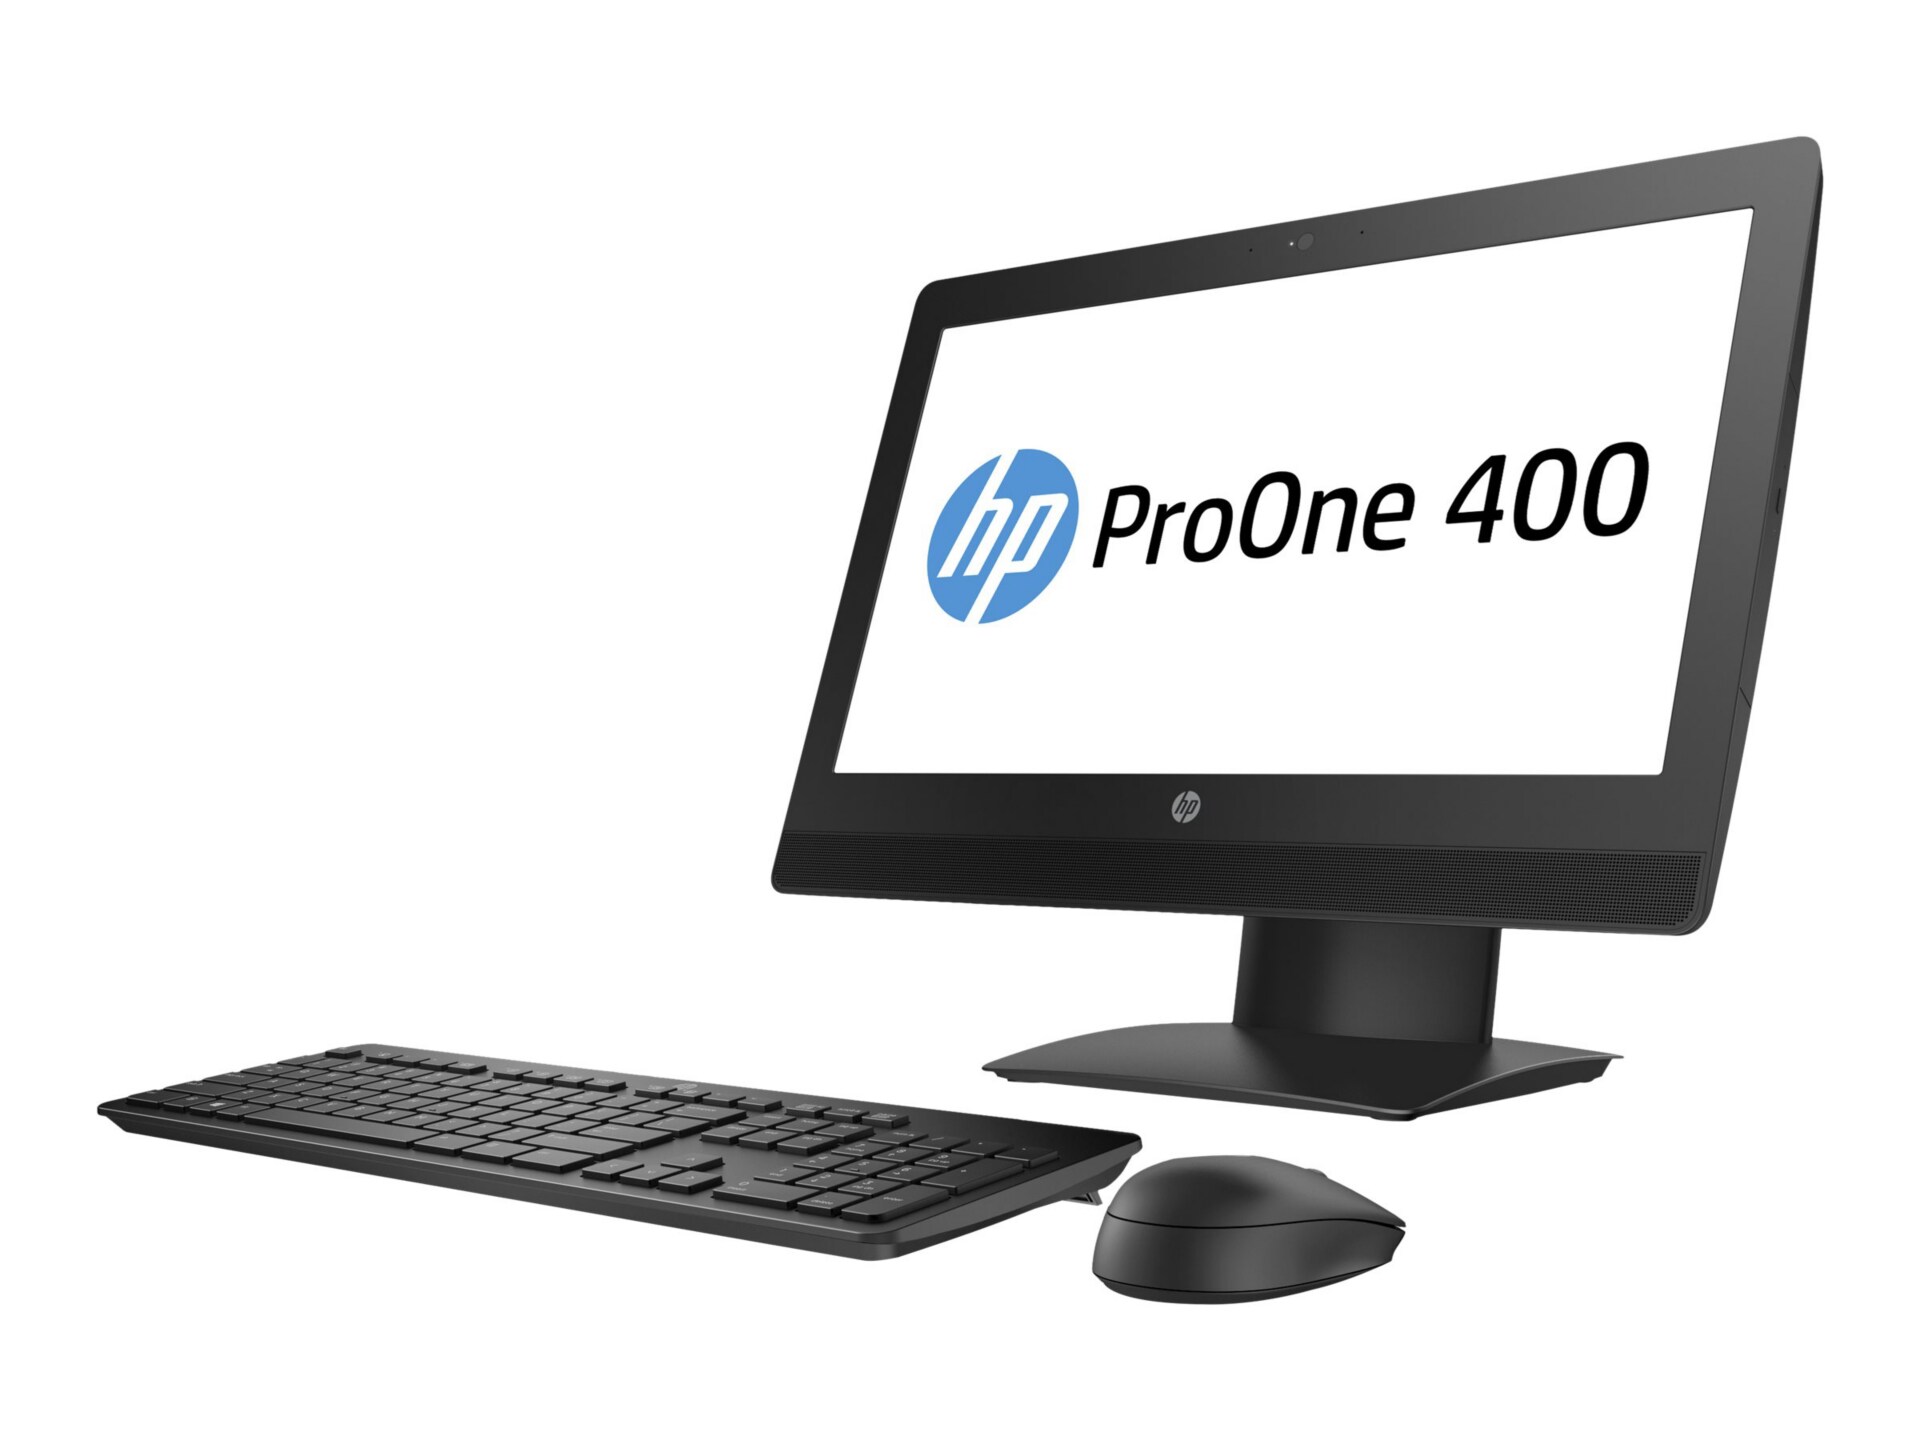 HP ProOne 400 G3 - all-in-one - Pentium G4560T 2.9 GHz - 4 GB - 500 GB - LED 20" - US